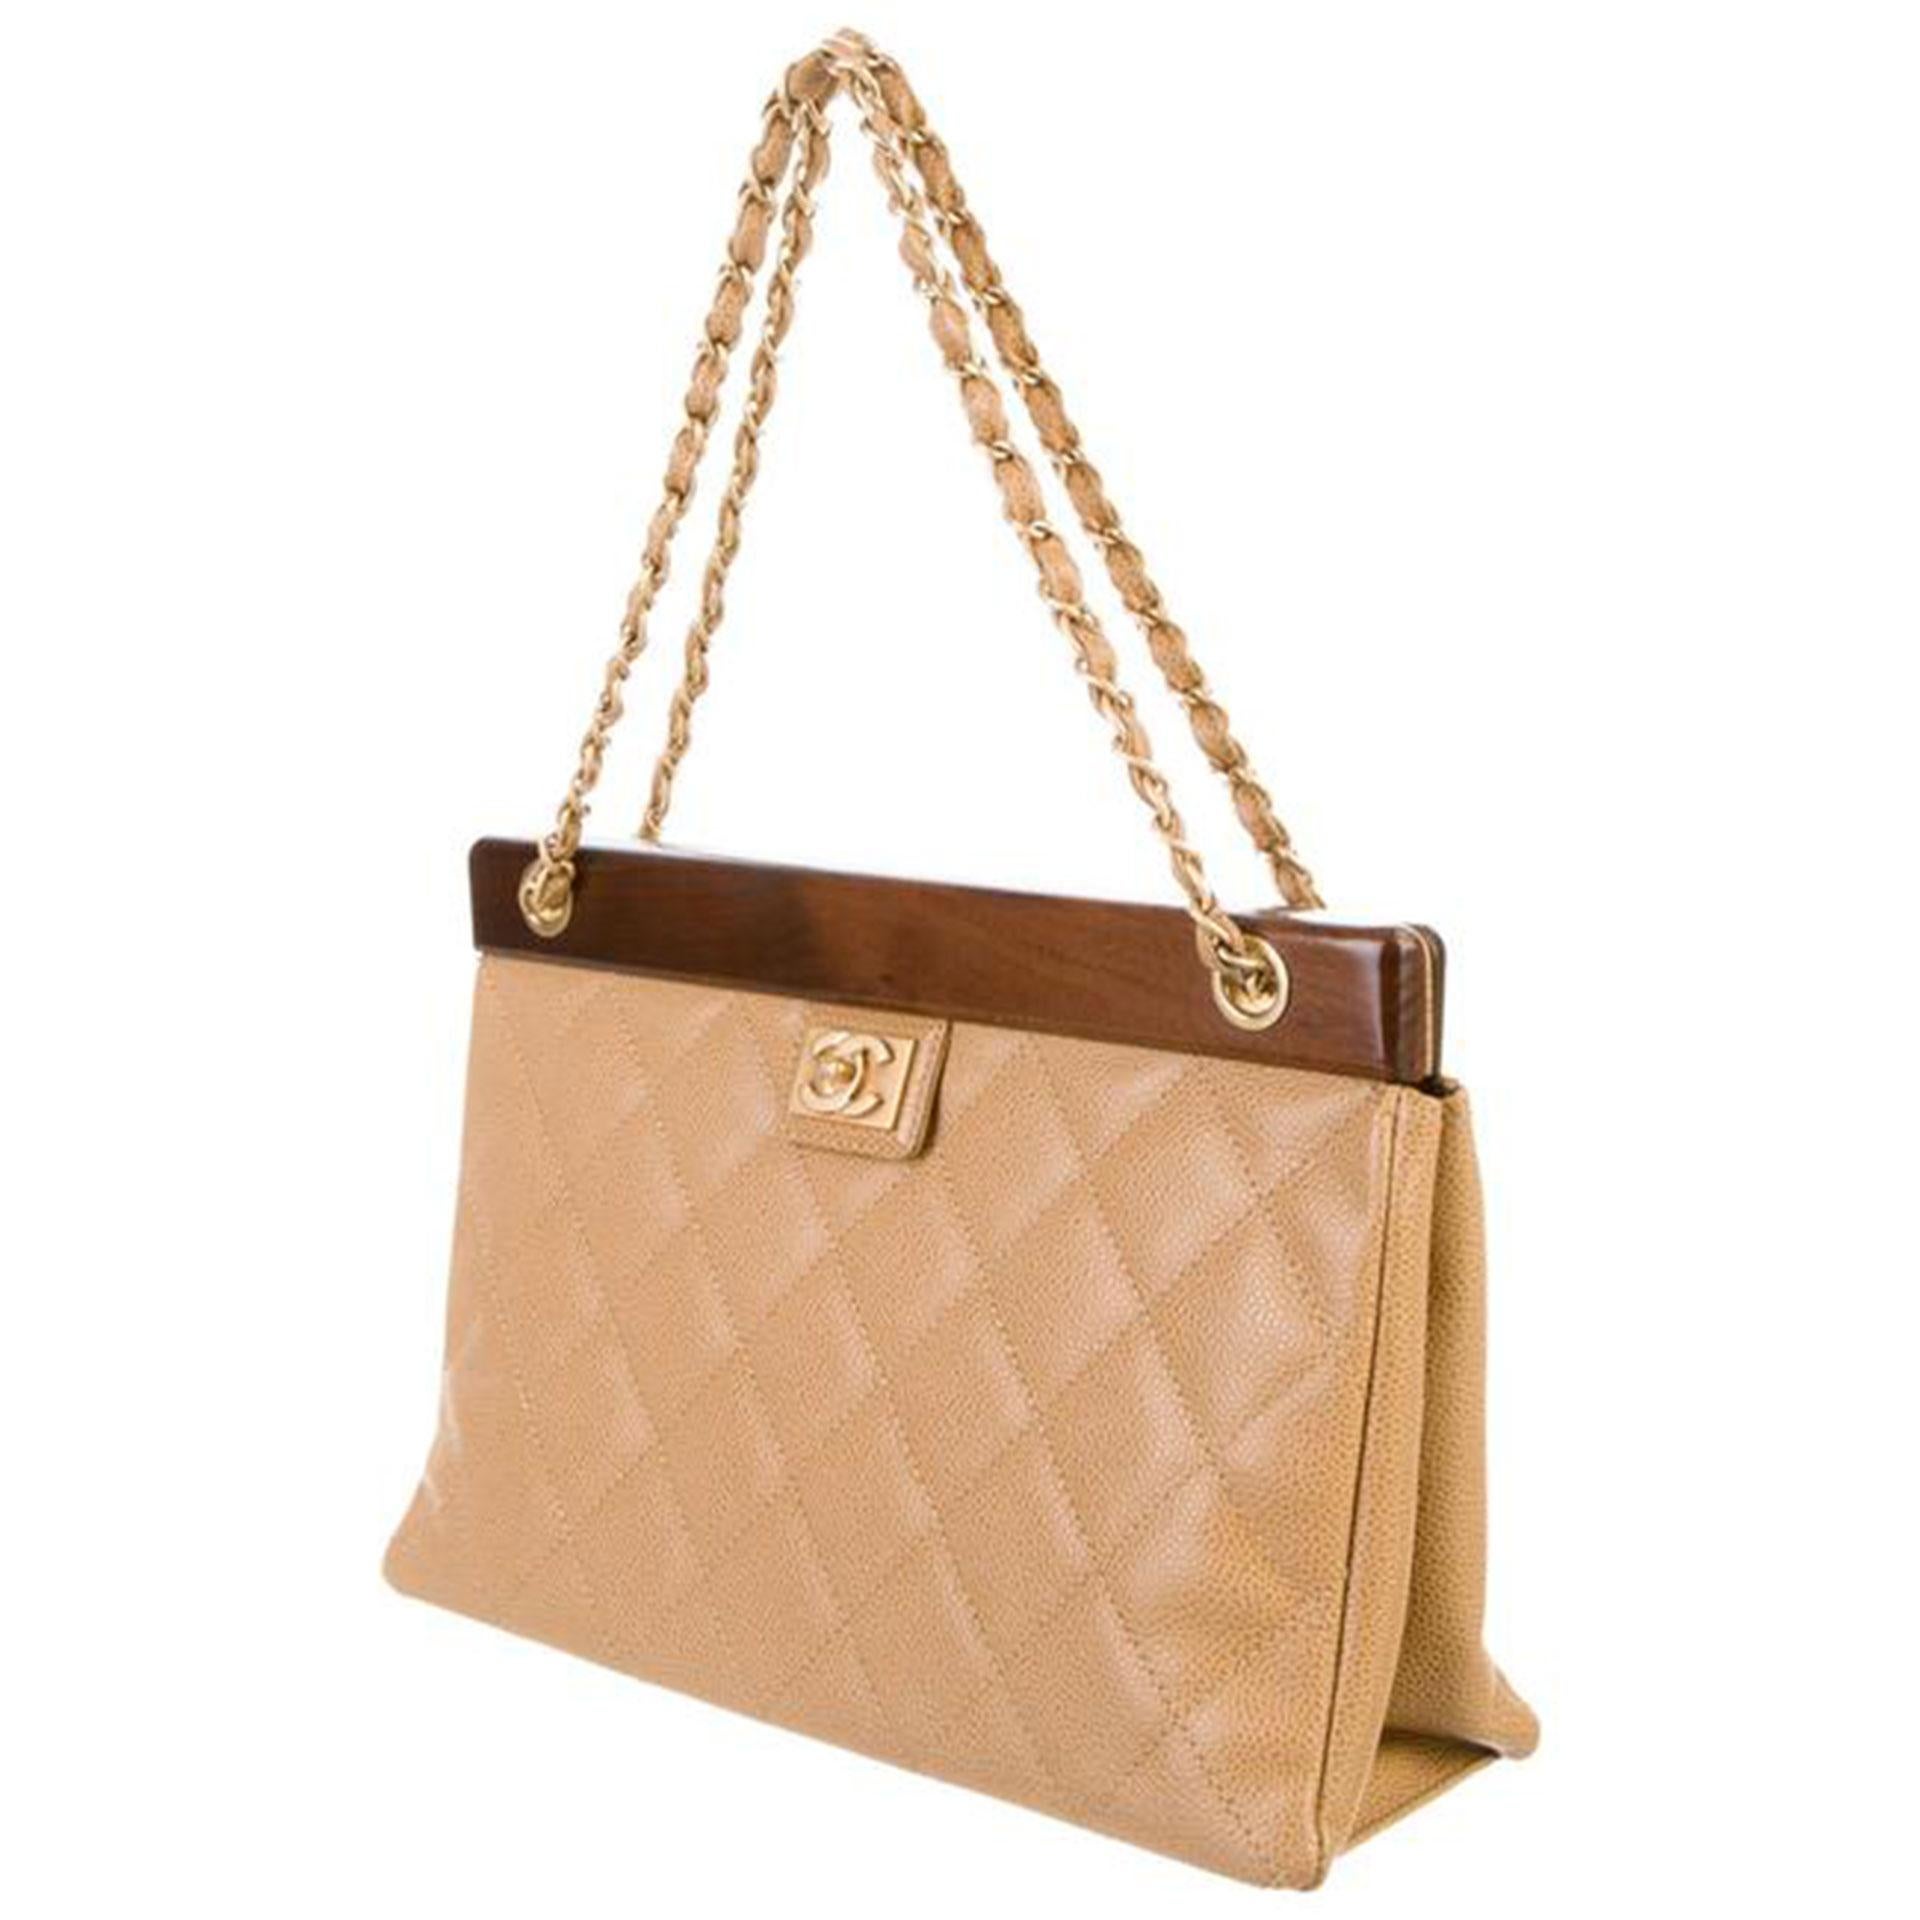 Chanel Vintage Classic Beige Caviar Wood Medium Tote Bag

Gold hardware
CC logo at front
Beige quilted Caviar leather
Classic interwoven chain straps
concealed magnetic closure at top frame
Leather lined beige interior
Main interior zippered